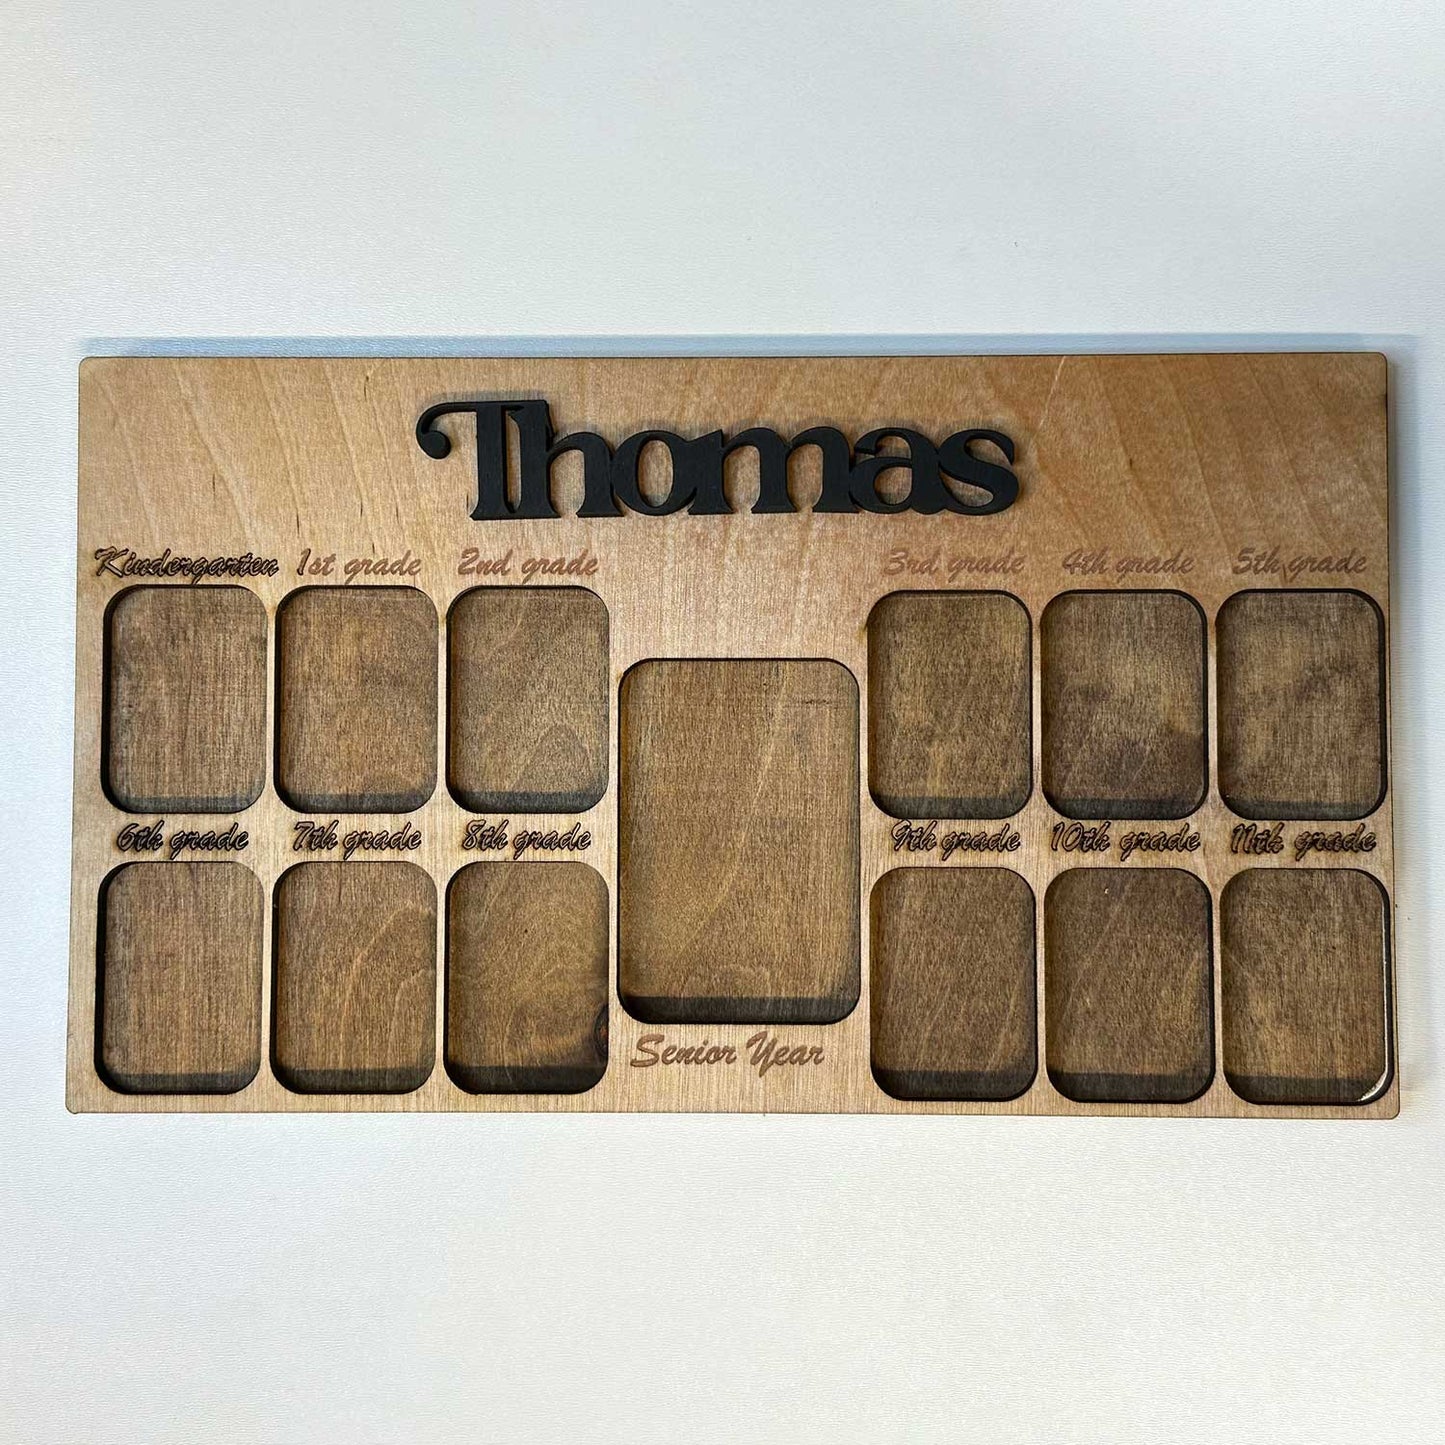 Personalized Student Yearly Photos -  K-12 Wood Photo Frame With Name on Top